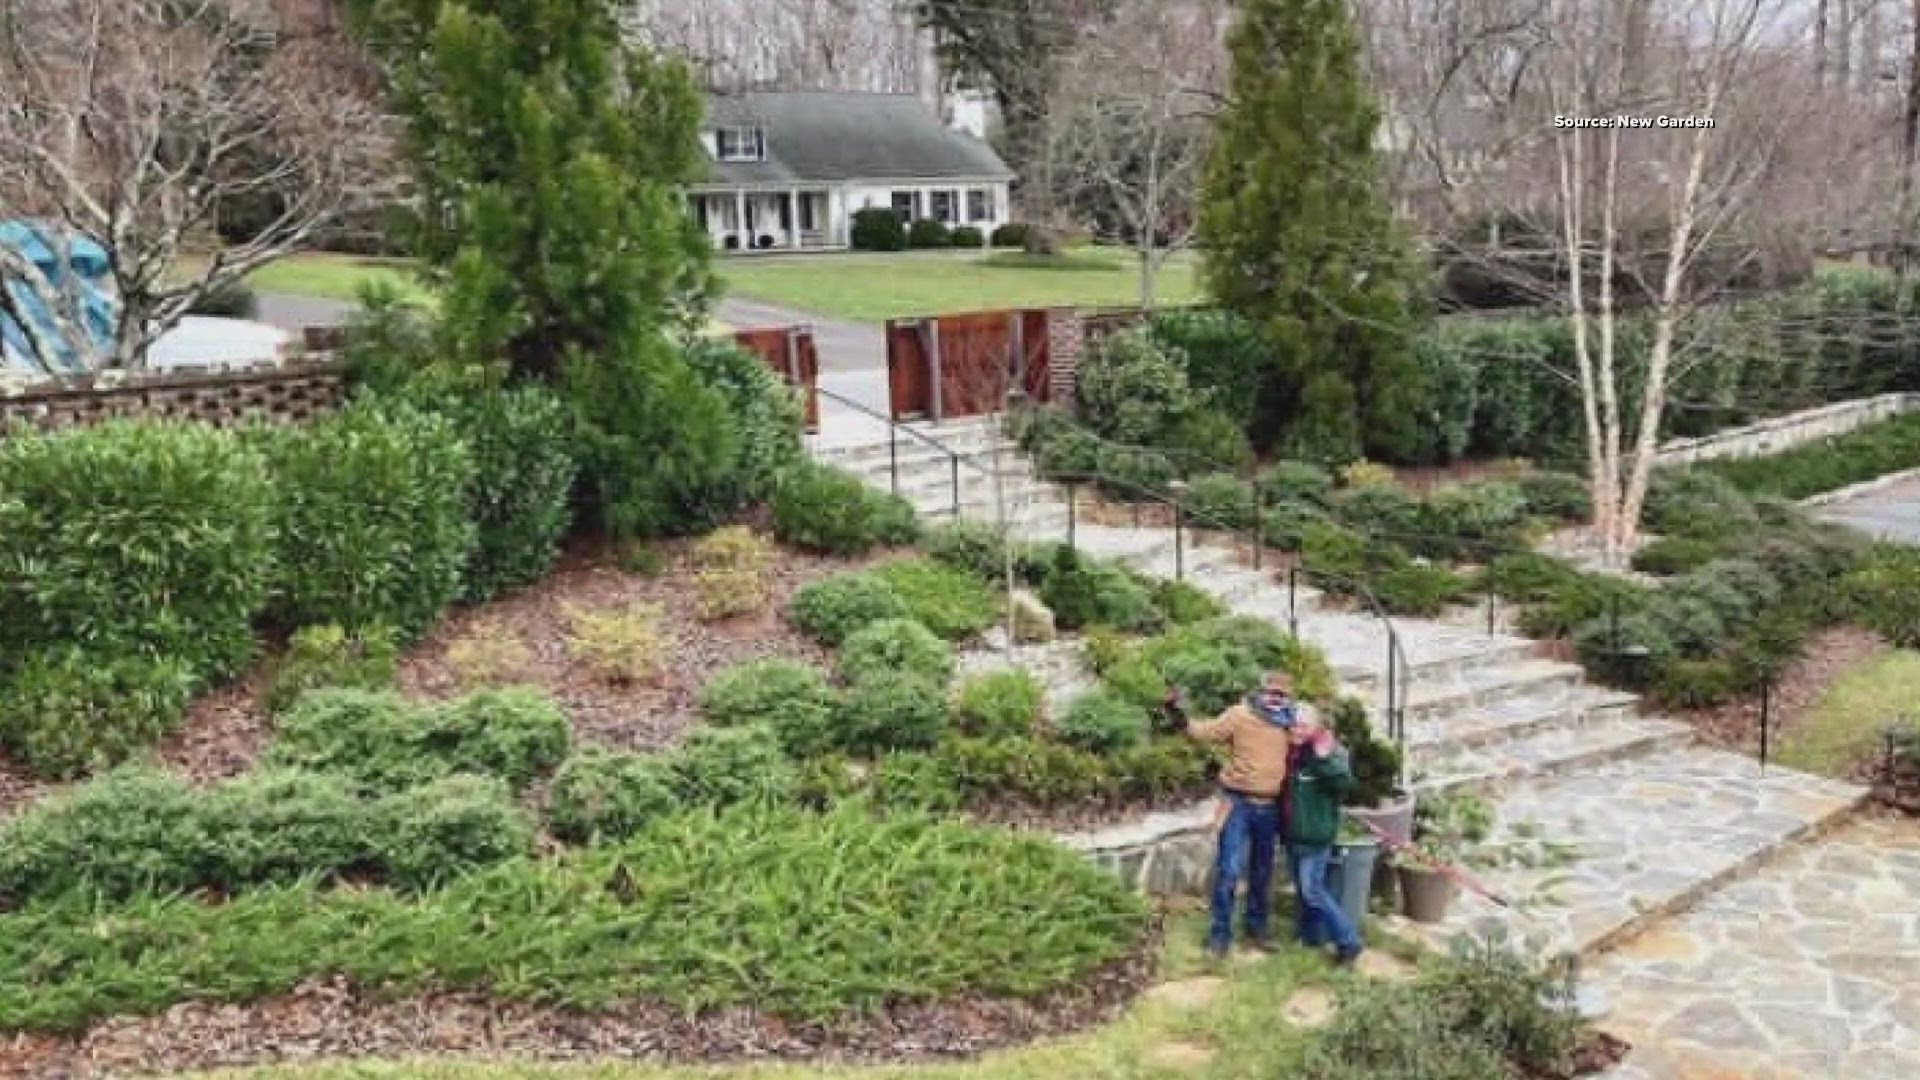 Landscapers said recent fluctuating temperatures can impact how grass grows.